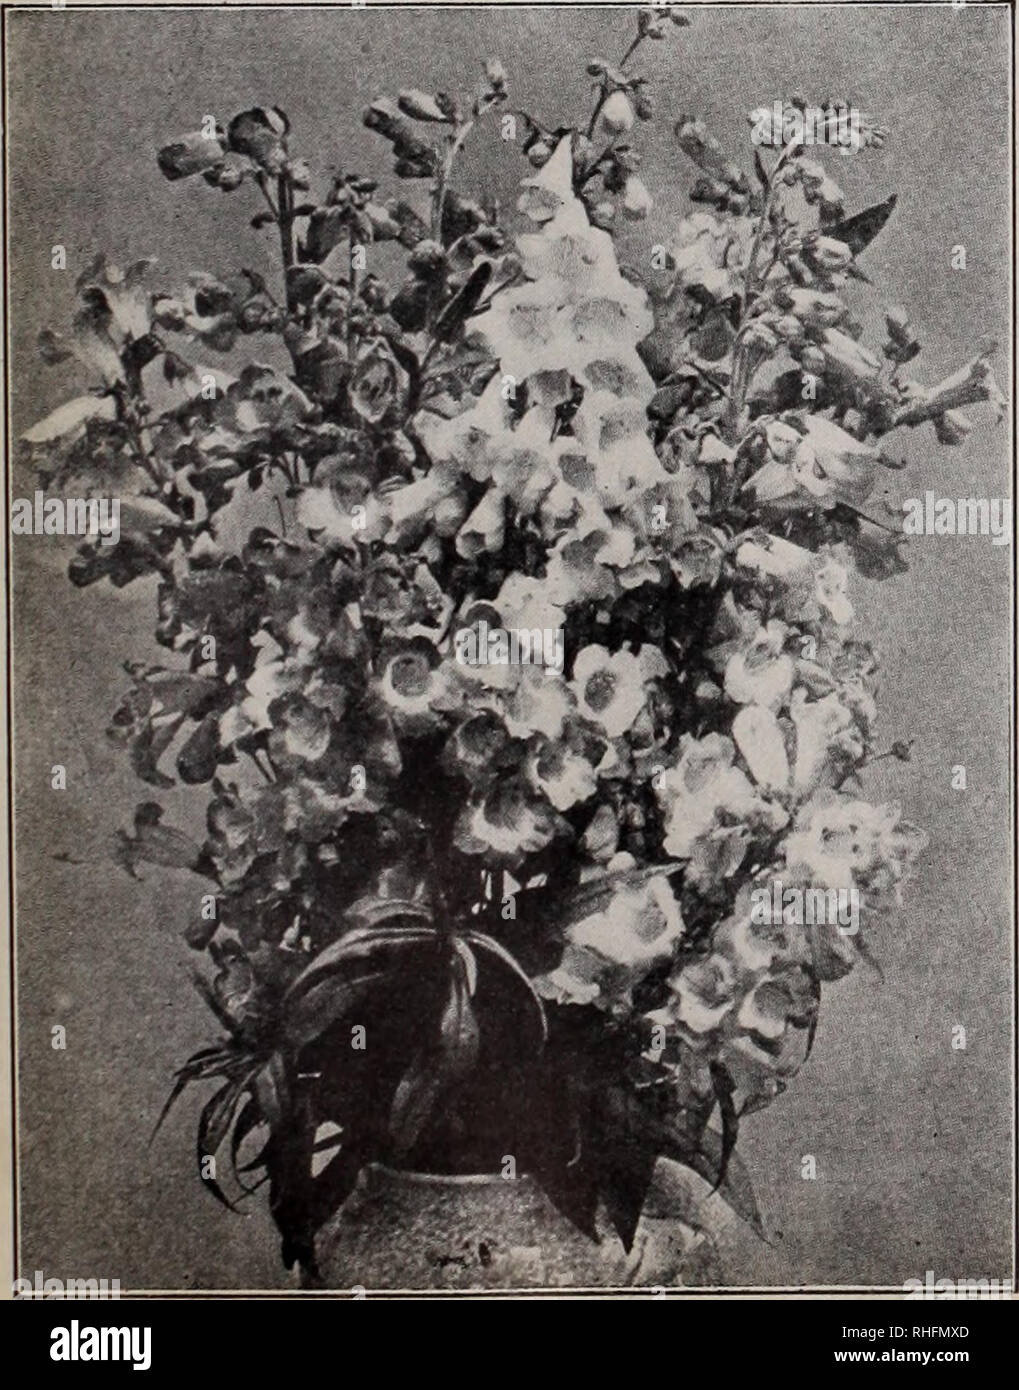 . Boddington's quality bulbs, seeds and plants / Arthur T. Boddington.. Nursery Catalogue. BODDINGTON'S ^A^Utltl/ SEEDS 35 NEMESIA, Large-flowered. H.H.A. Free-flowering and bushy; splendid for massing. Pl^^ Orange So 25 Cream and White 25 Carmine 25 Red Scarlet Striped Collection of the above 6 varieties, $1.25 NEMESIA, Dwarf. Fine for edgings and pot culture. Blue Gem White Gem NICOTIANA affinis. H.A. 3 ft. Clusters of long while flowers; fragrant Oz., socts... 25 25 50 50 05 NICOTIANA AFFINIS. B.'S CHOICE HYBRIDS Fine variety of bright colors; sweet-scented. Pkt. 25 cts. NICOTIANA SANDERAE  Stock Photo